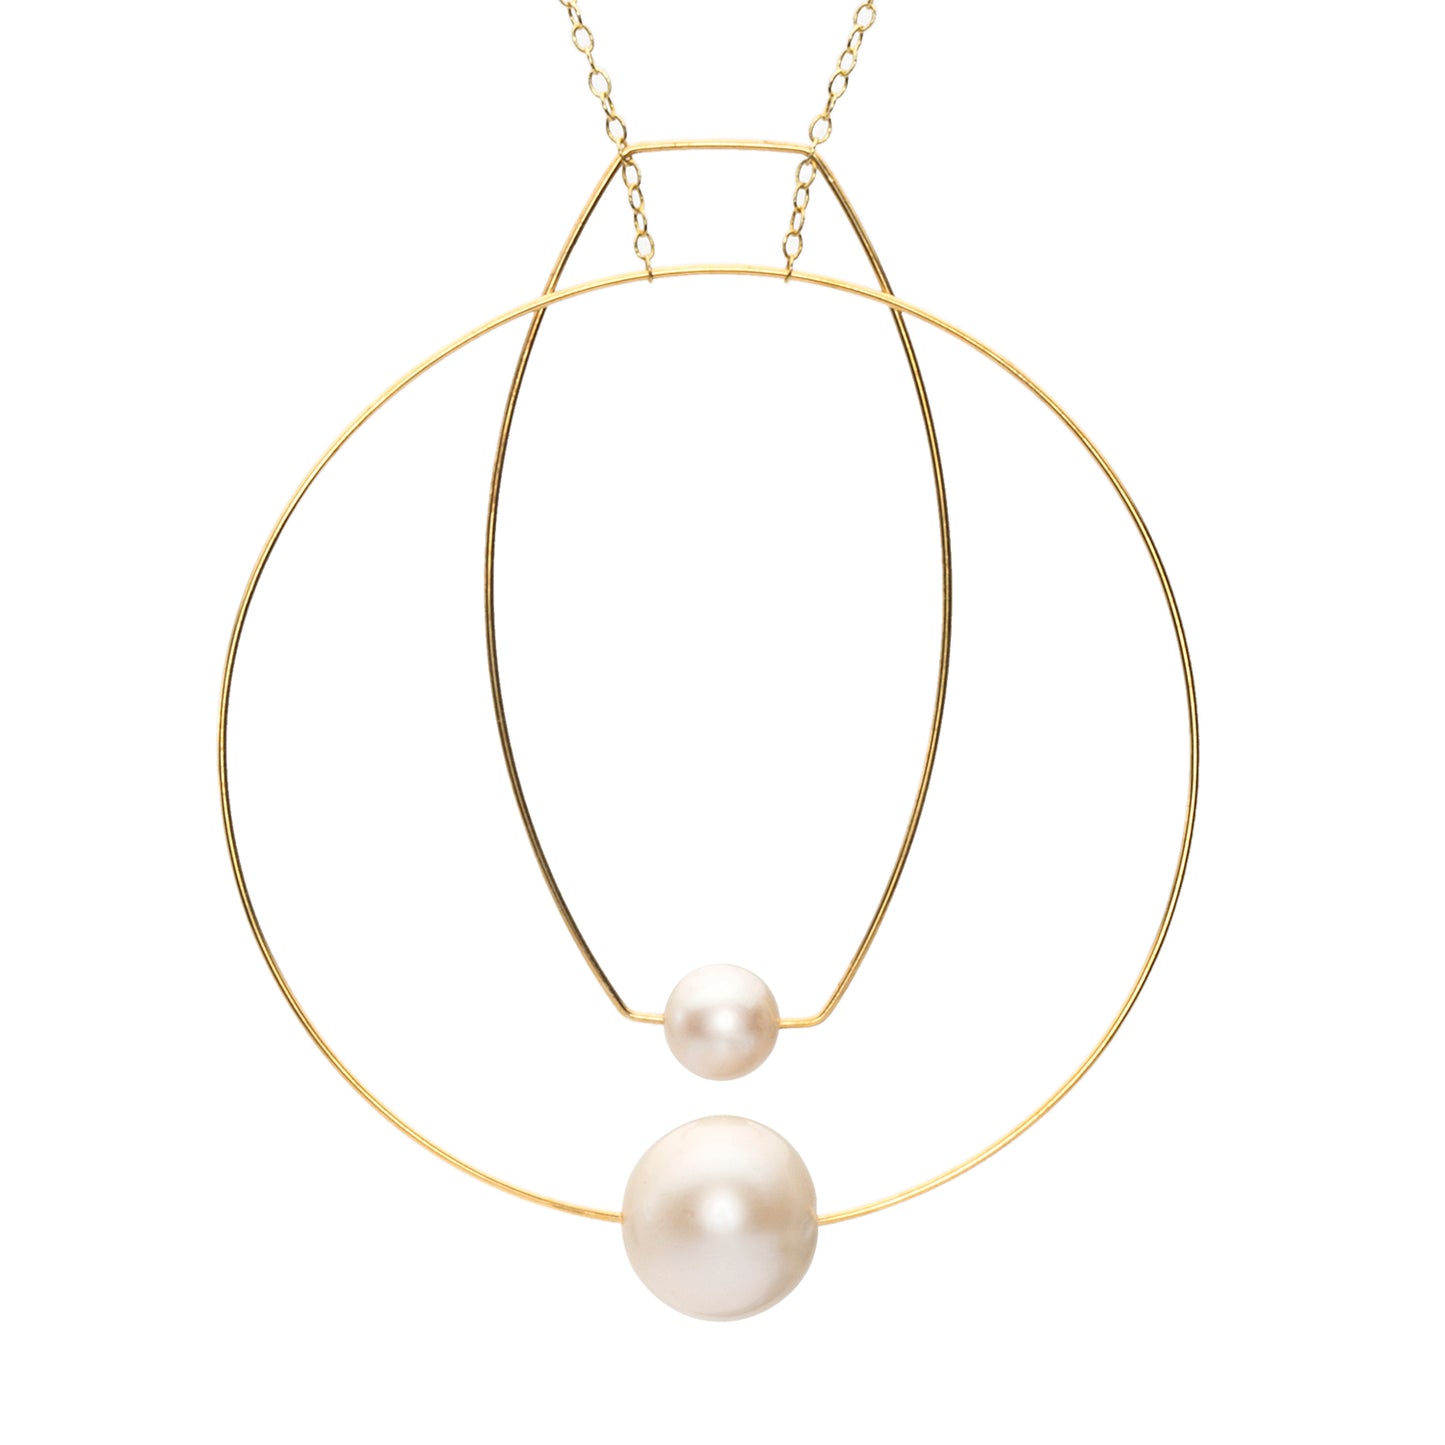 Multi Shape Necklace with Round Freshwater Pearls